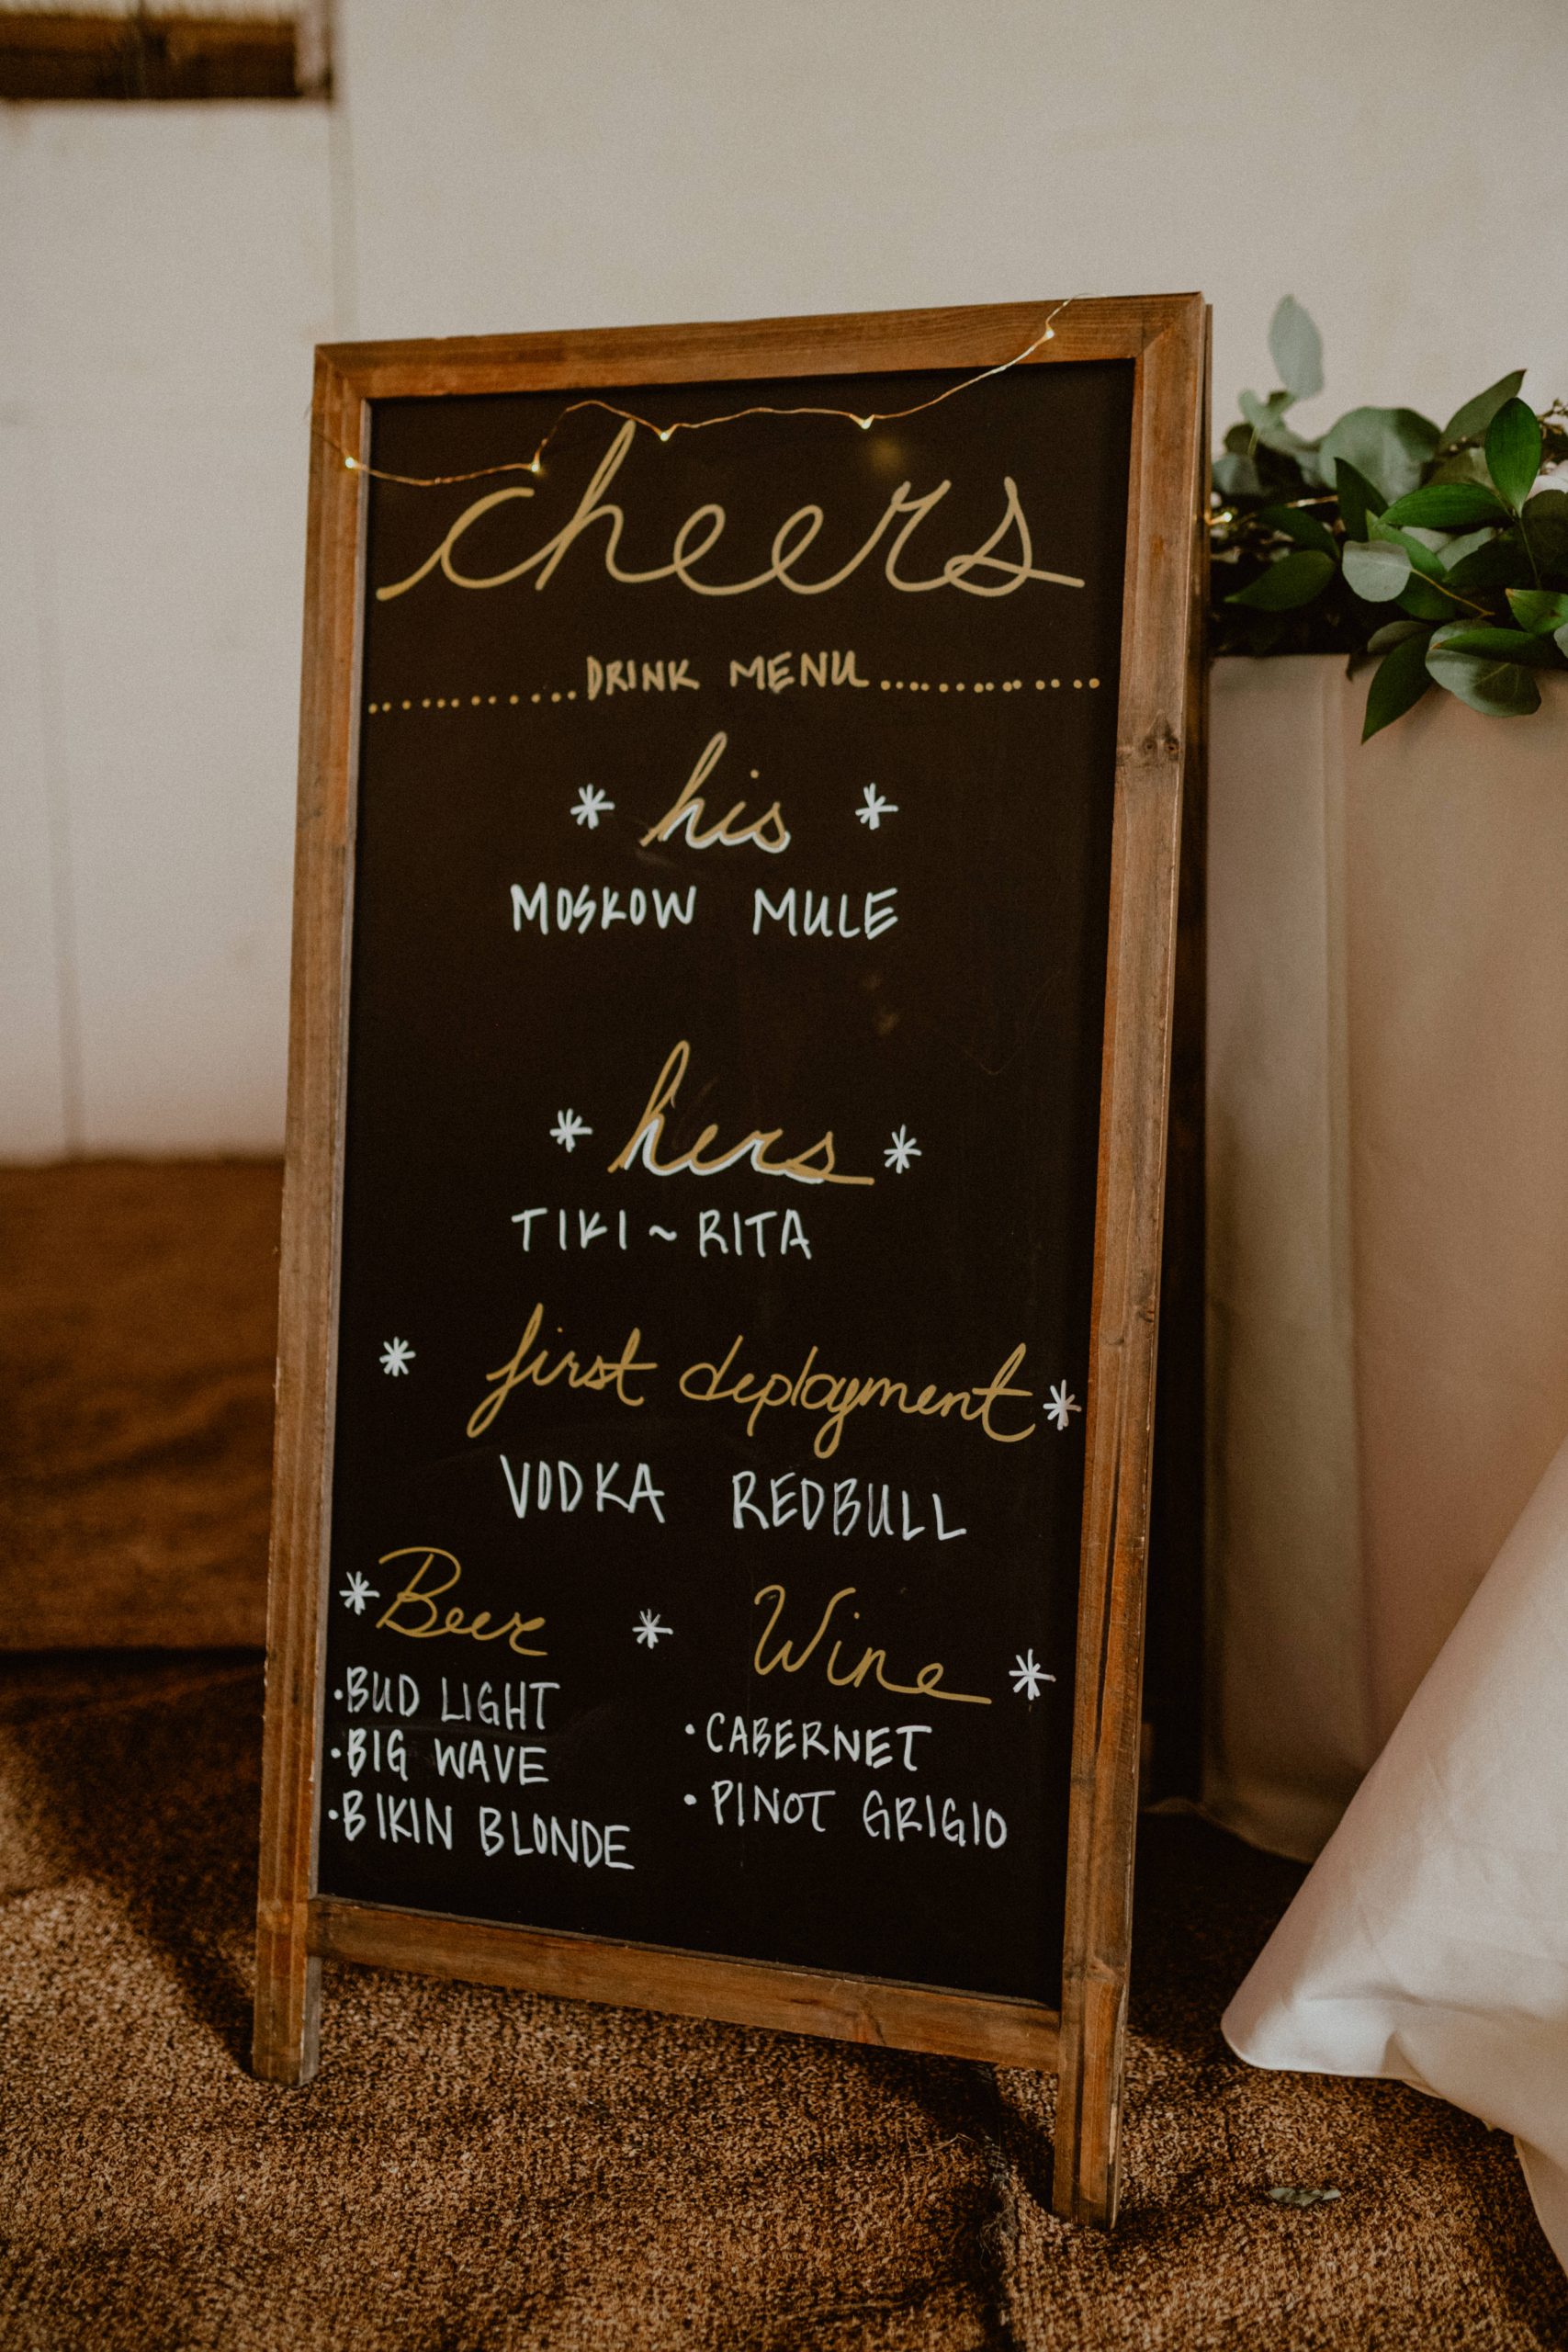 Drink menu for Sunset Ranch Wedding Day in Oahu at wedding ceremony ideas and inspiration for wedding day crafts | Oahu Wedding Photographer, Oahu Elopement Photographer, Destination Wedding Photographer, Destination Elopement Photographer, Newlywed moments ideas, Newlywed Photography inspiration, Hawaii Elopement ideas | chelseaabril.com